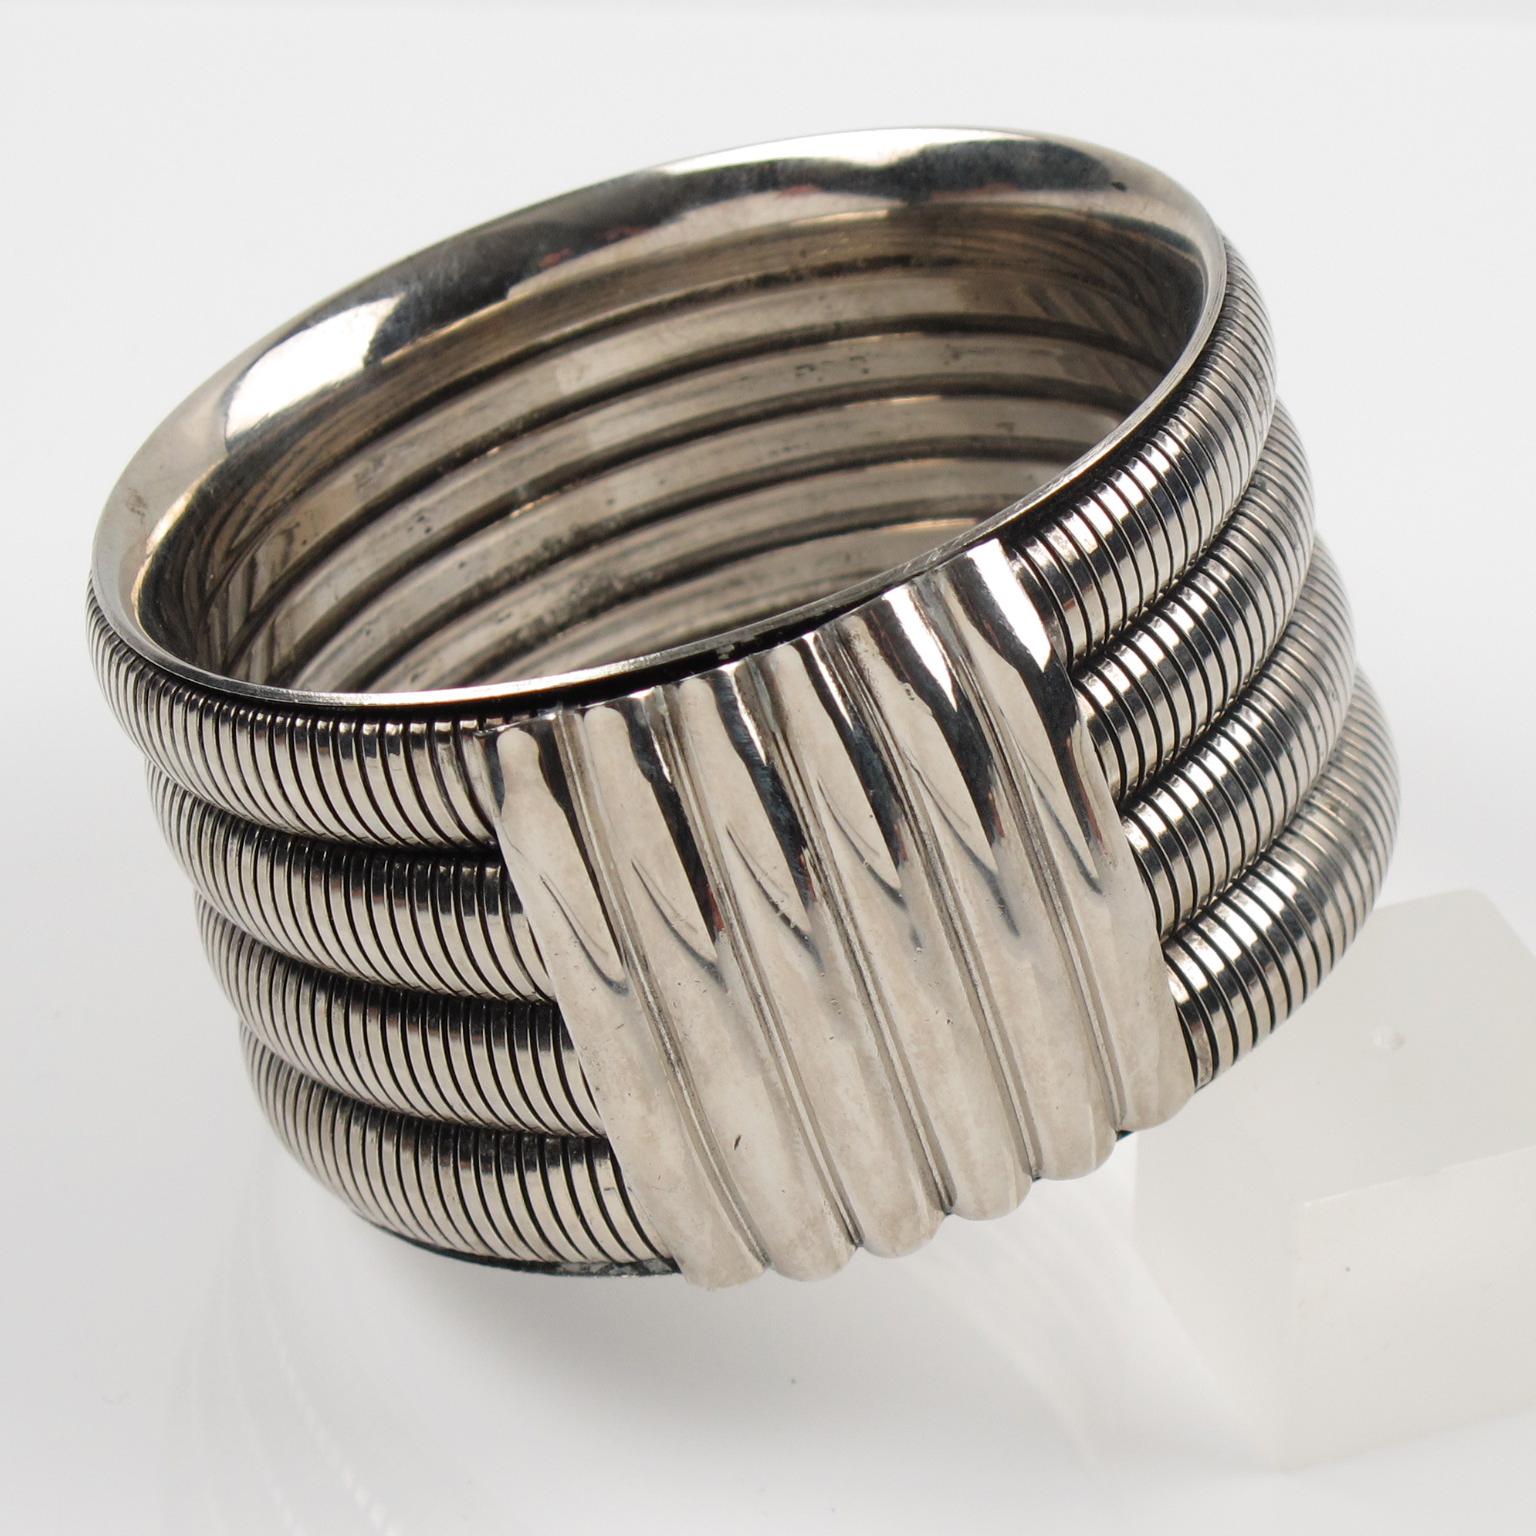 Stunning modernist bracelet bangle. Chunky oversized bangle in chromed metal all carved and textured with serpentine chain design. Impressive 1970s Space Age, Machine Age statement piece. There is no visible maker's mark.
Measurements: 2.69 in.